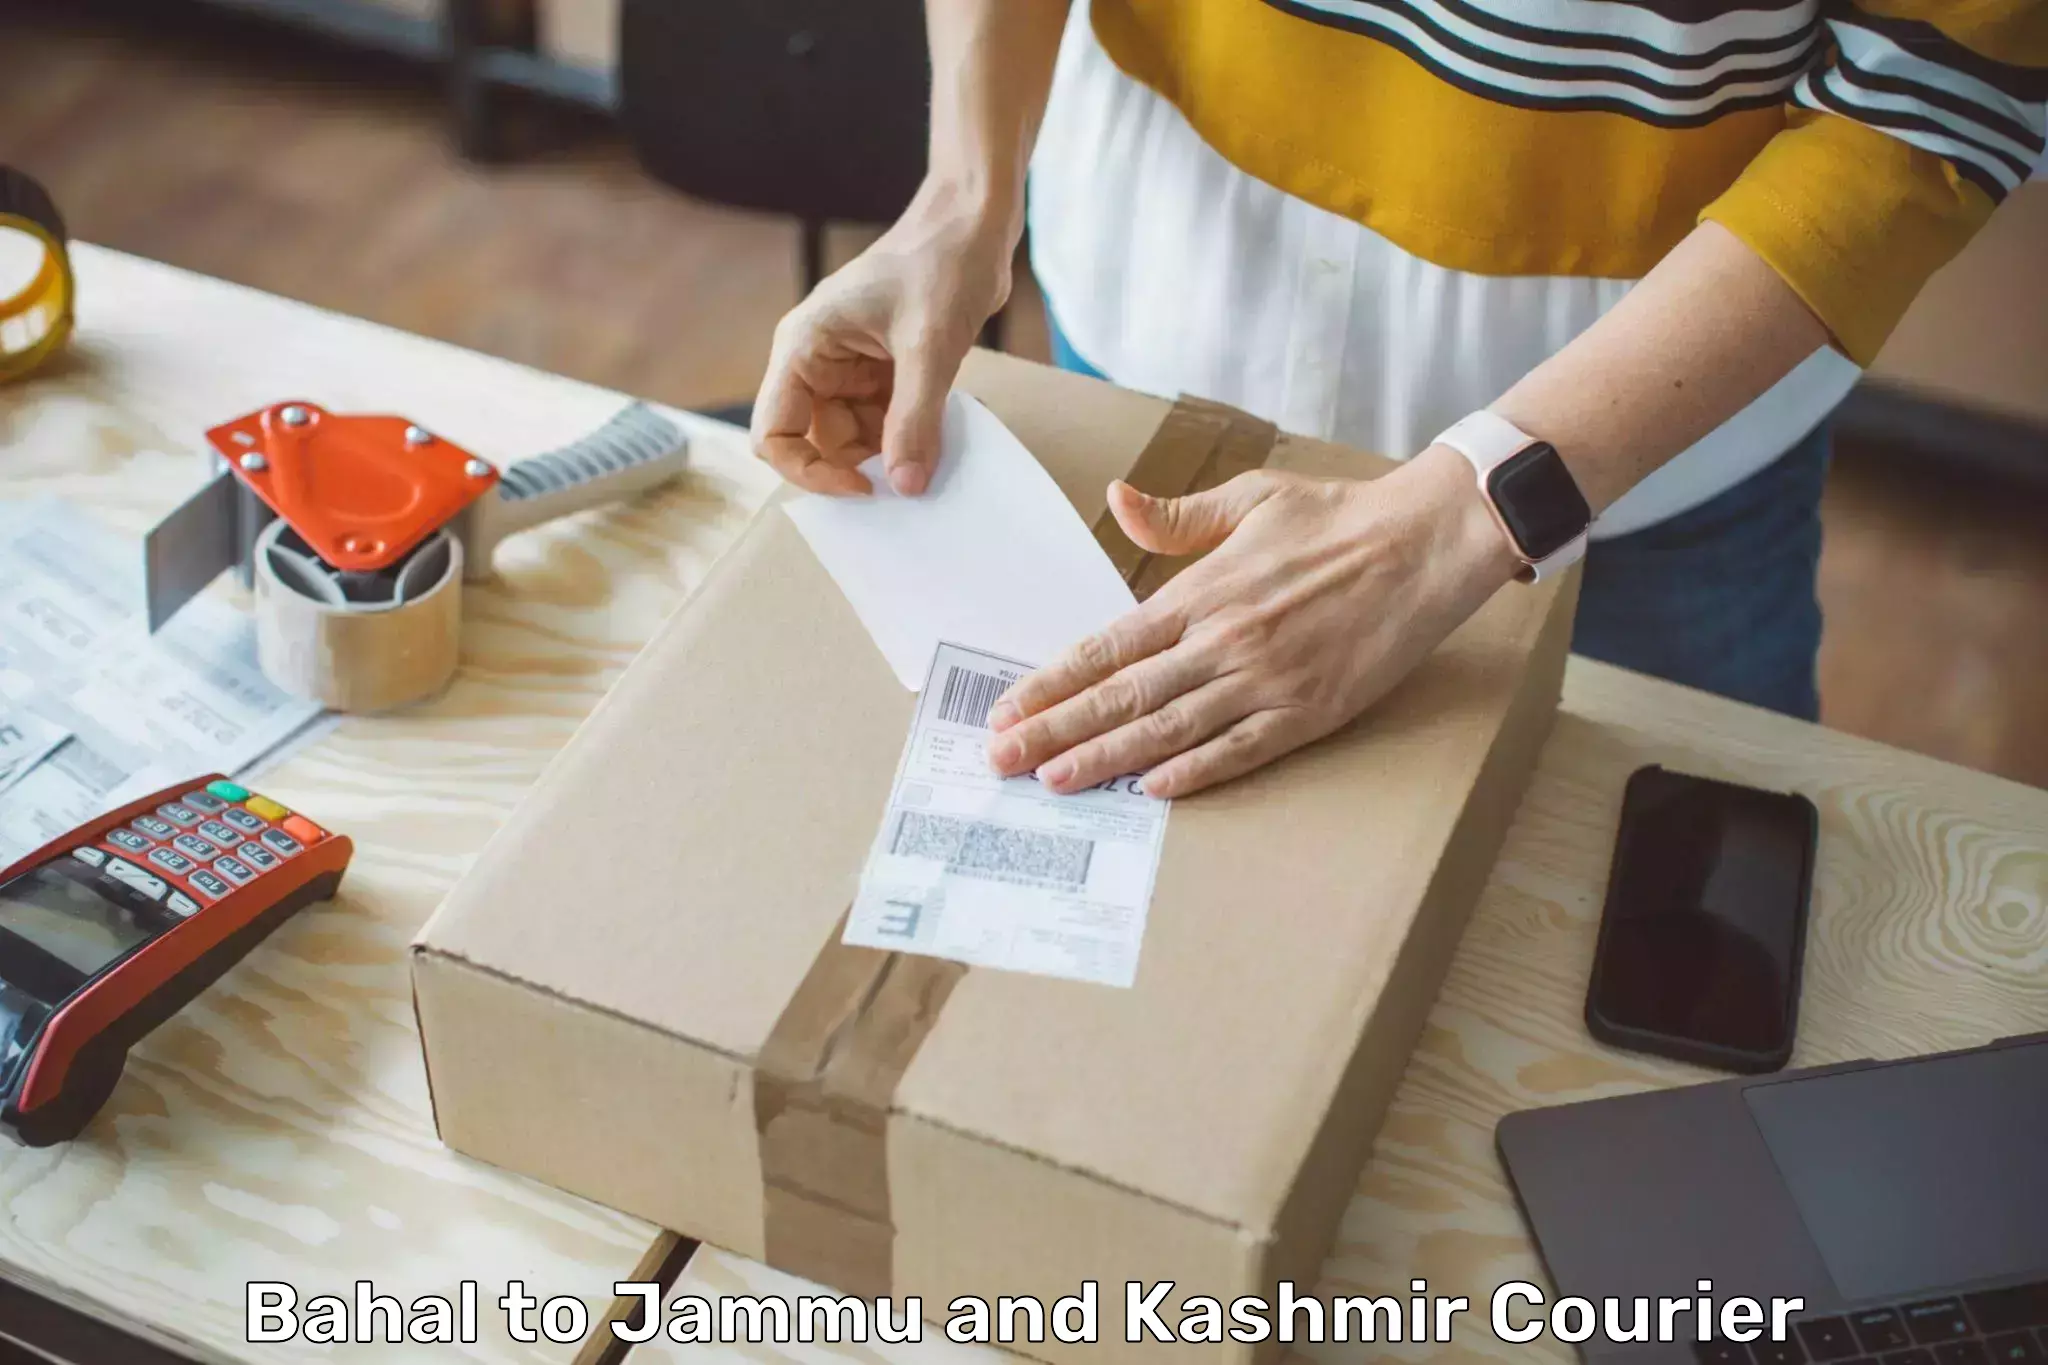 Efficient shipping operations Bahal to University of Jammu